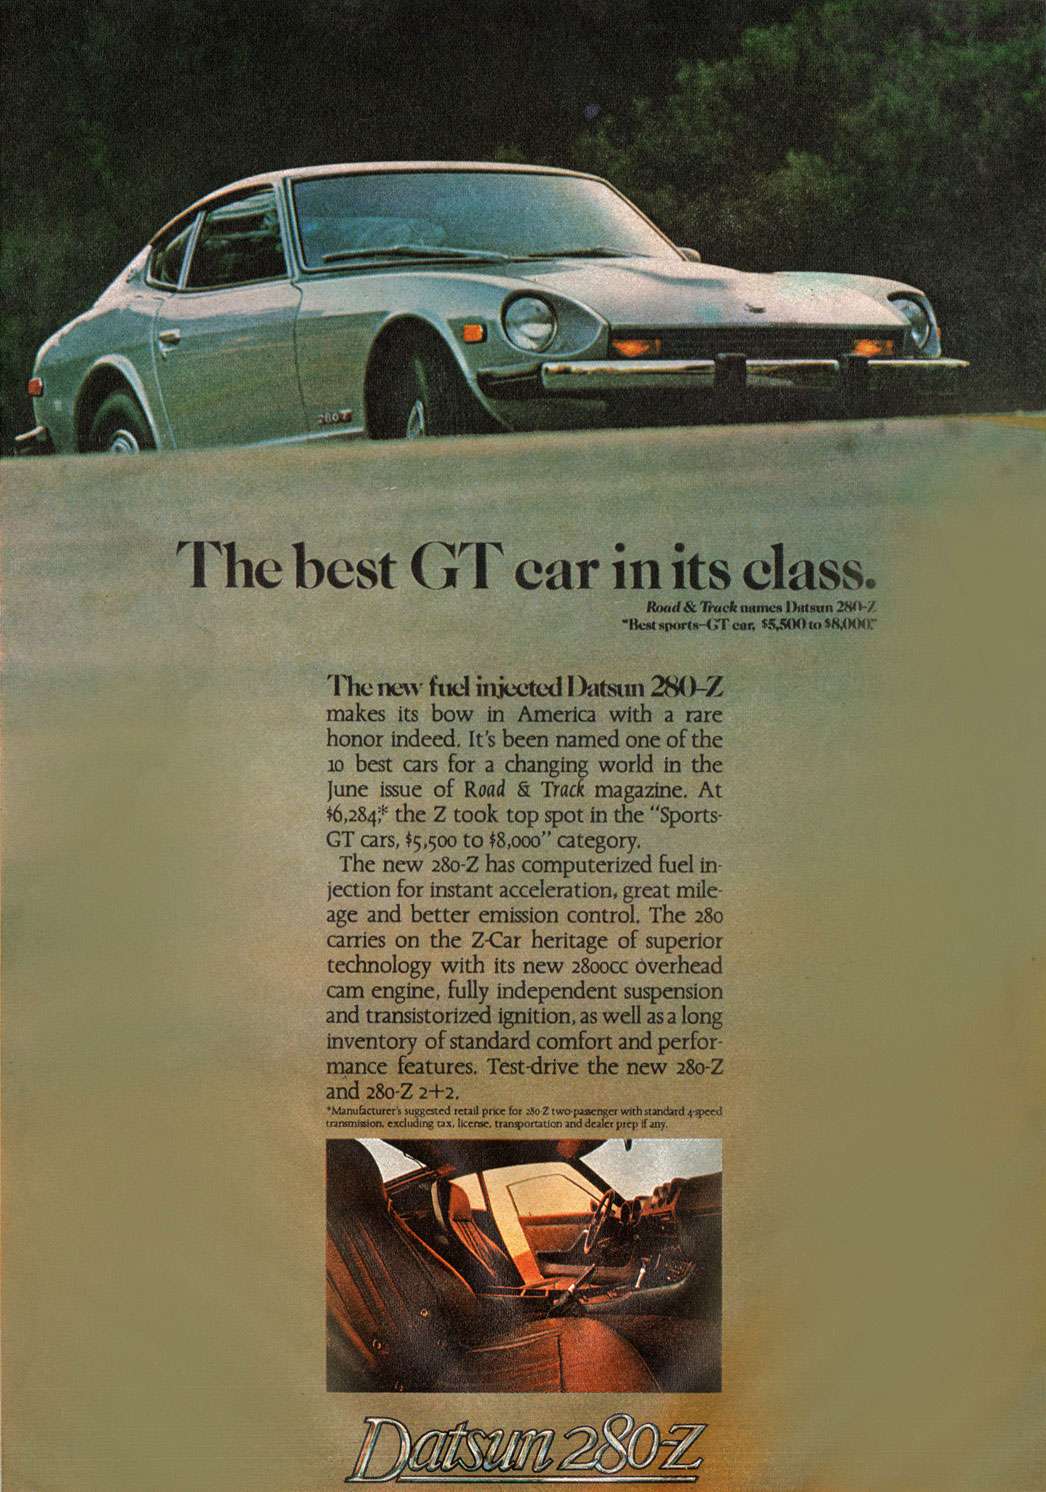 The new fuel injected Datsun 280-Z makes its bow in America with a rare honor indeed. It's been named one of the io best cars for a changing world in the June issue of Road & Track magazine. At $6,28e the Z took top spot in the 'Sports-GT cars, $5,50o to $8,000' category. The new 28o-Z has computerized fuel in-jection for instant acceleration, great mile-age and better emission control. The 28o carries on the Z-Car heritage of superior technology with its new 2800cc overhead cam engine, fully independent suspension and transistorized ignition, as well as a long inventory of standard comfort and perfor-mance features. Test-drive the new 28o-Z and 280-Z 2+2. 
*Manufacturer's suggated retad price for :SO Z two-passenger with standard 4-specti Inns:mission. excluding tax. Ikense, transportation and dcakt prep if any.